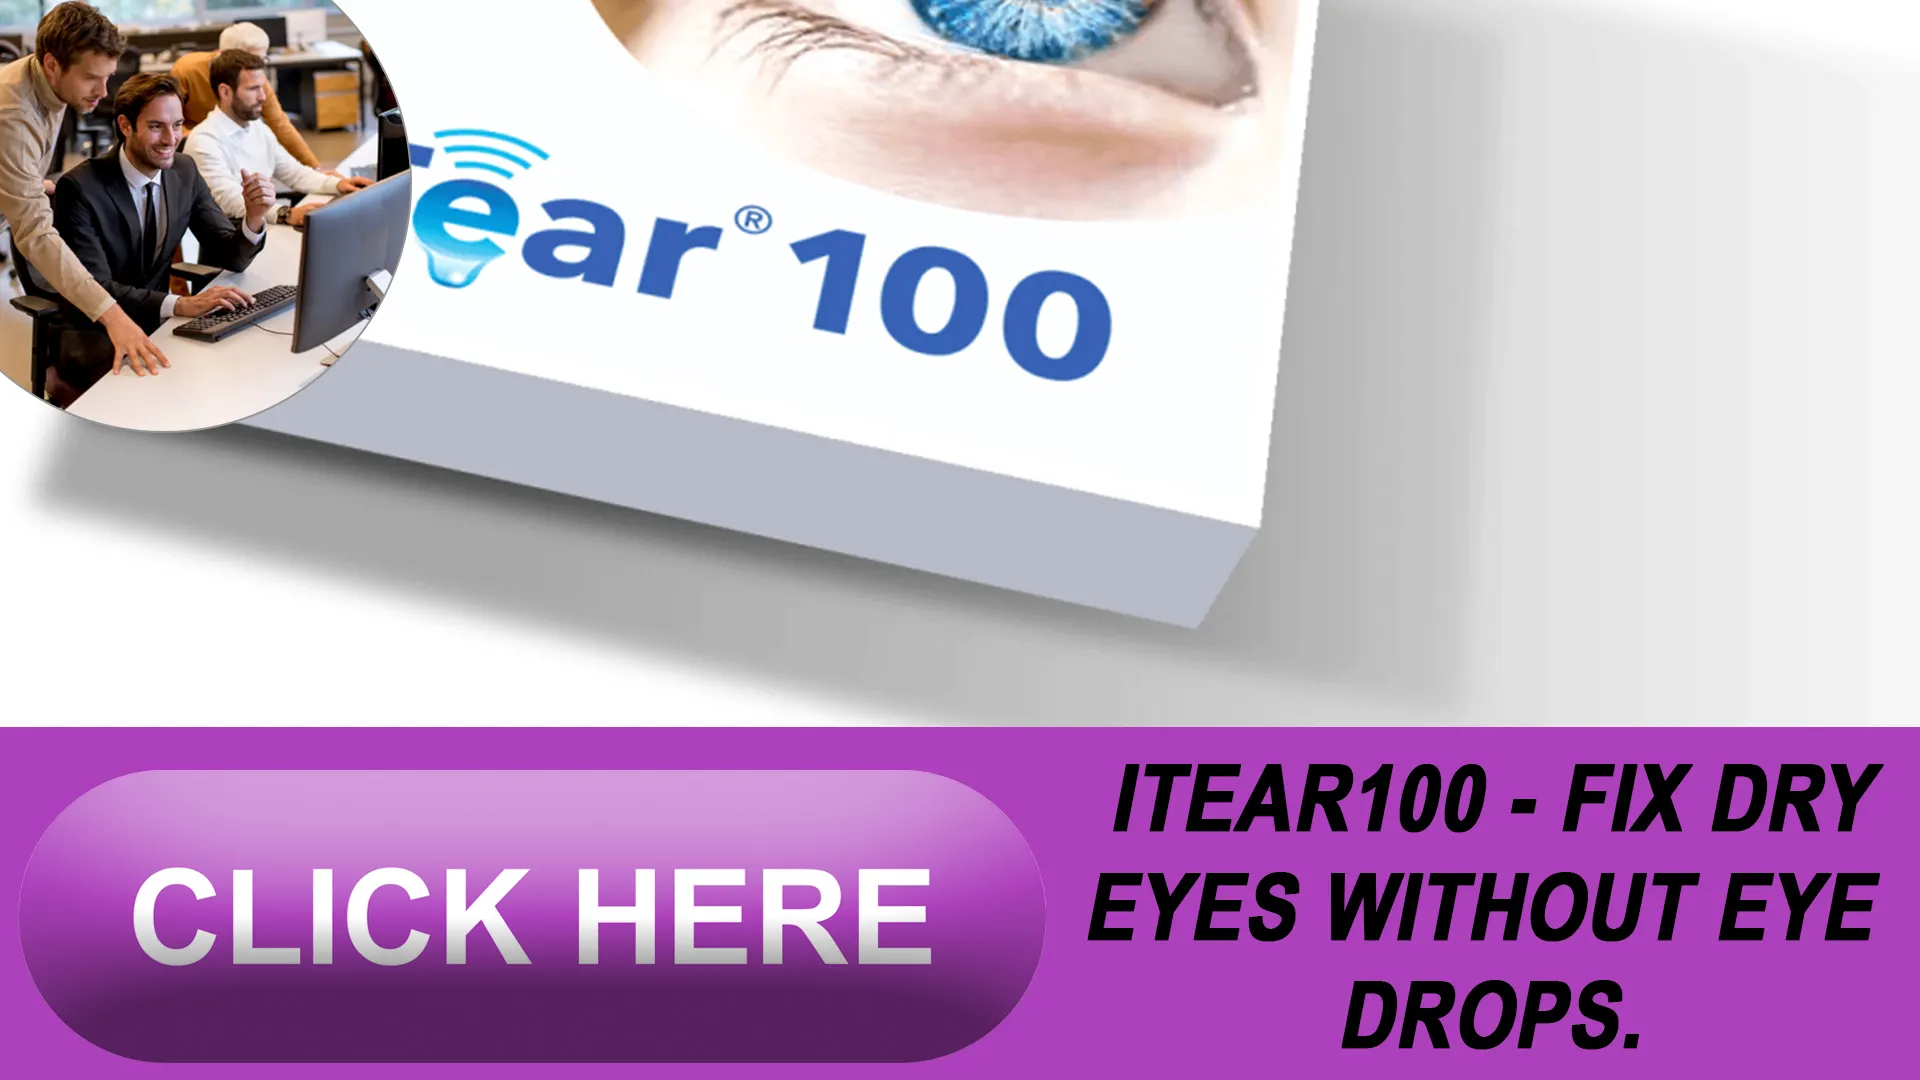  Achieving Optimal Eye Health with the iTEAR100 